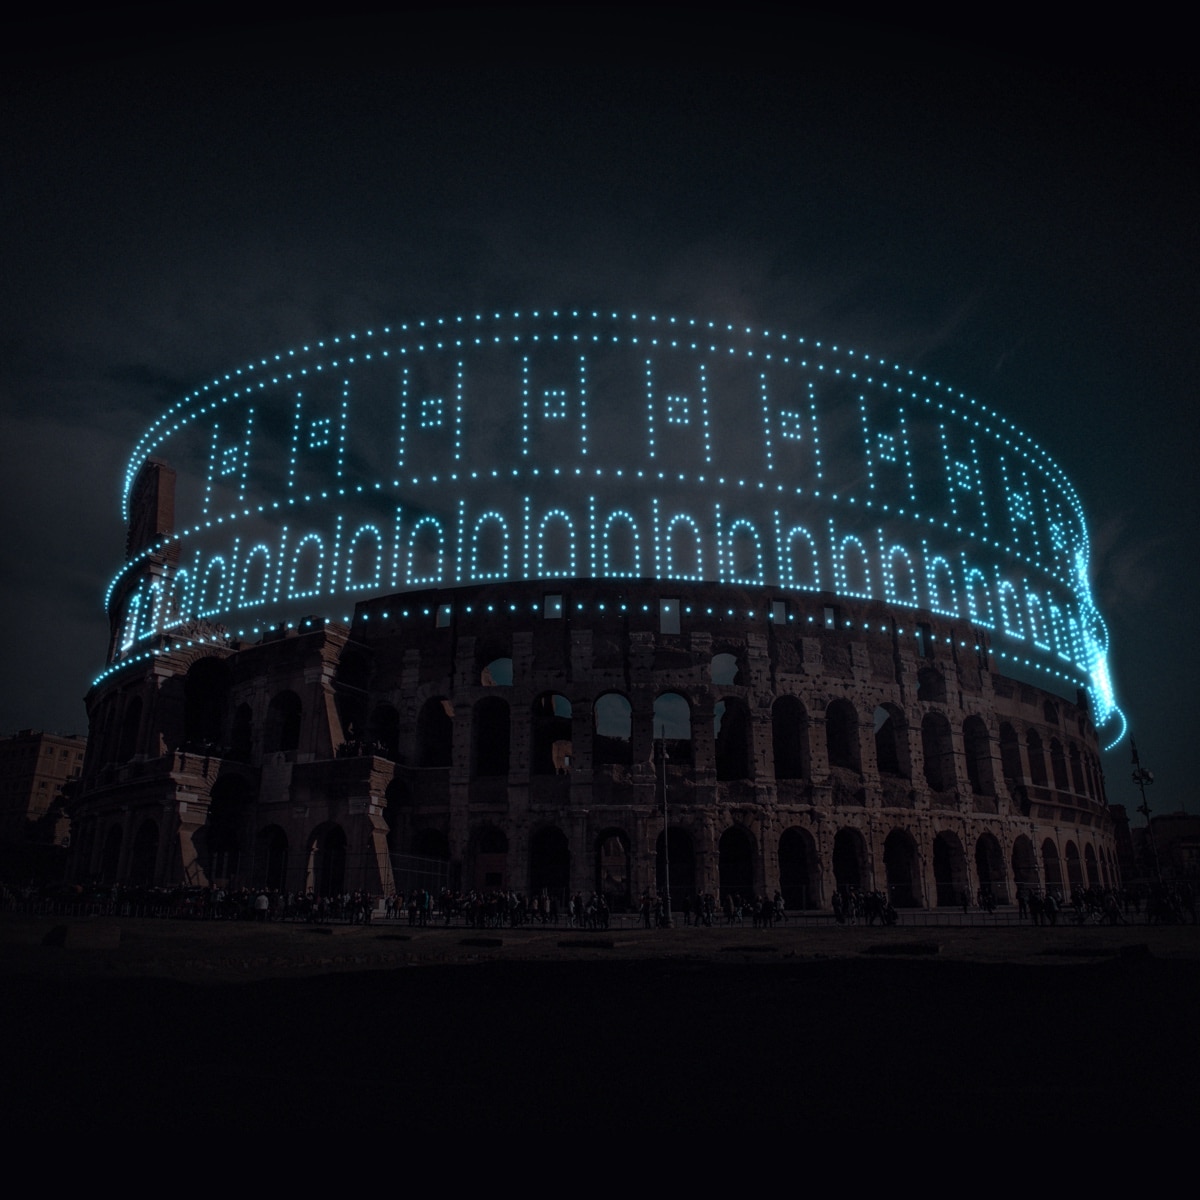 DRIFT Aerial Sculpture of the Colosseum